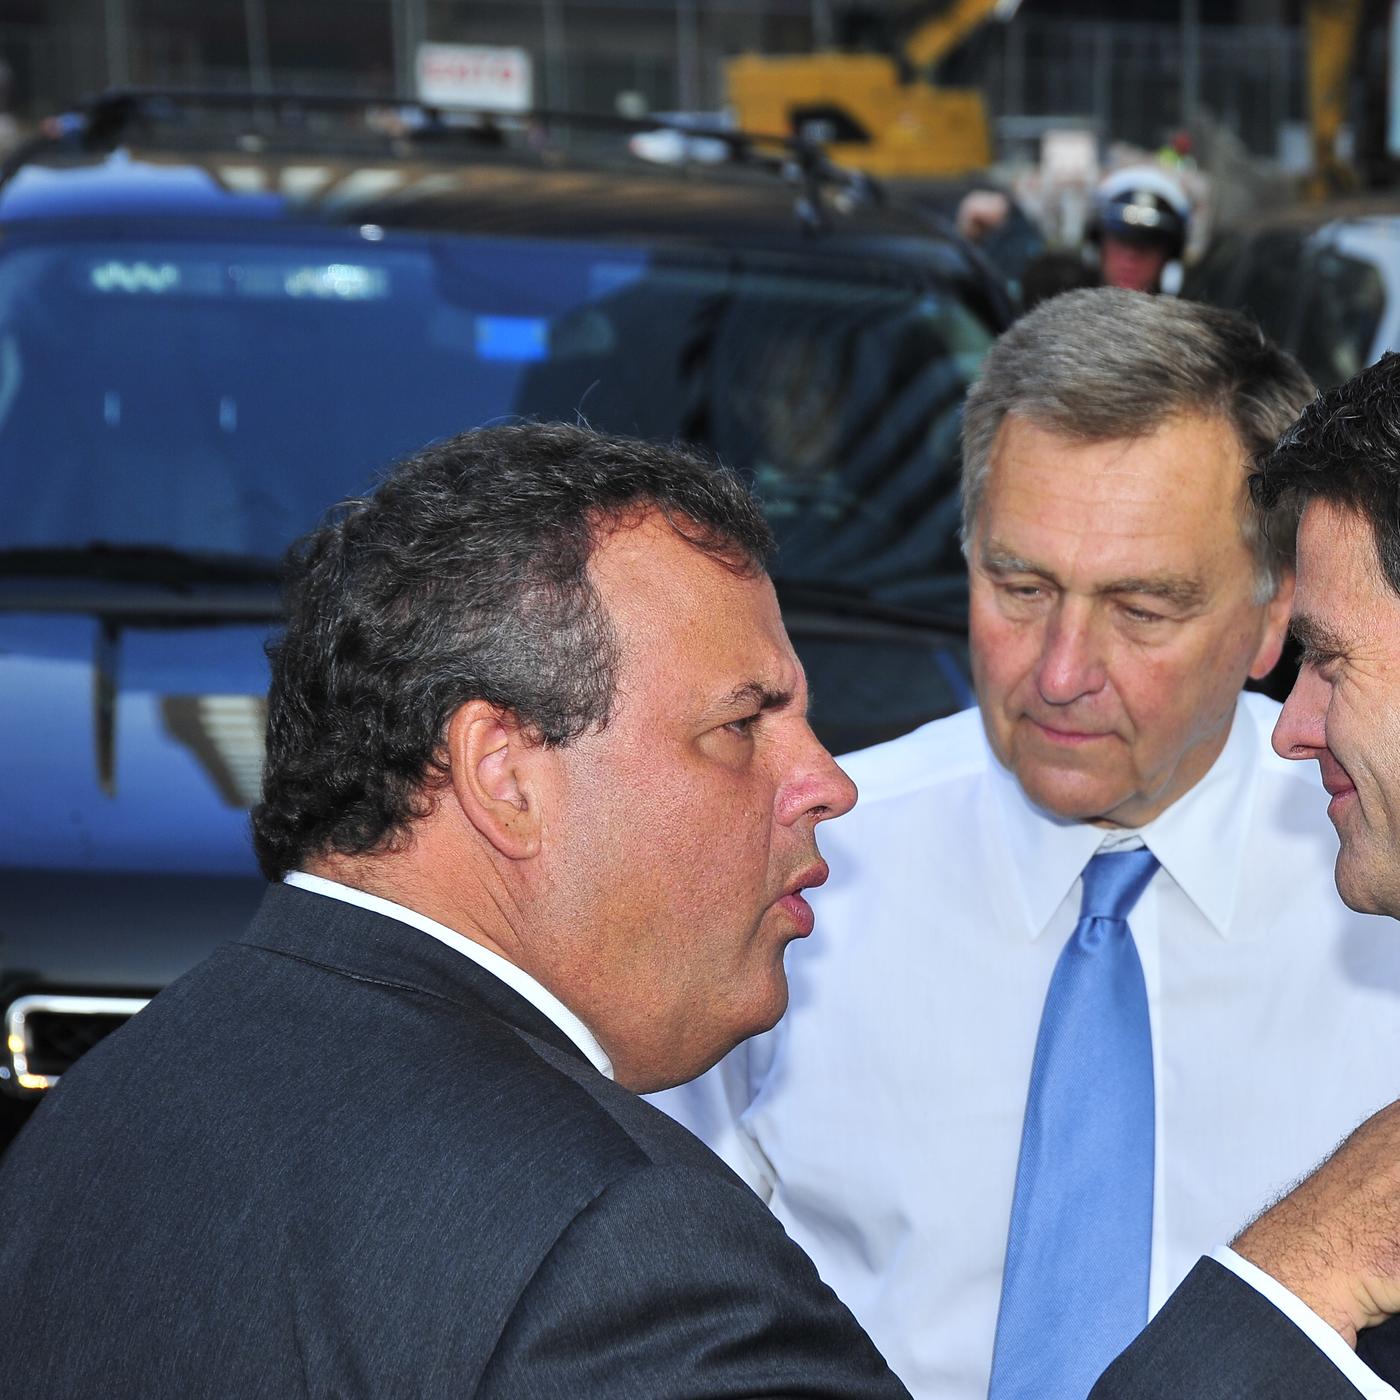 Christie's Taxpayer-Funded Lawyers Increase Work on Bridgegate Case